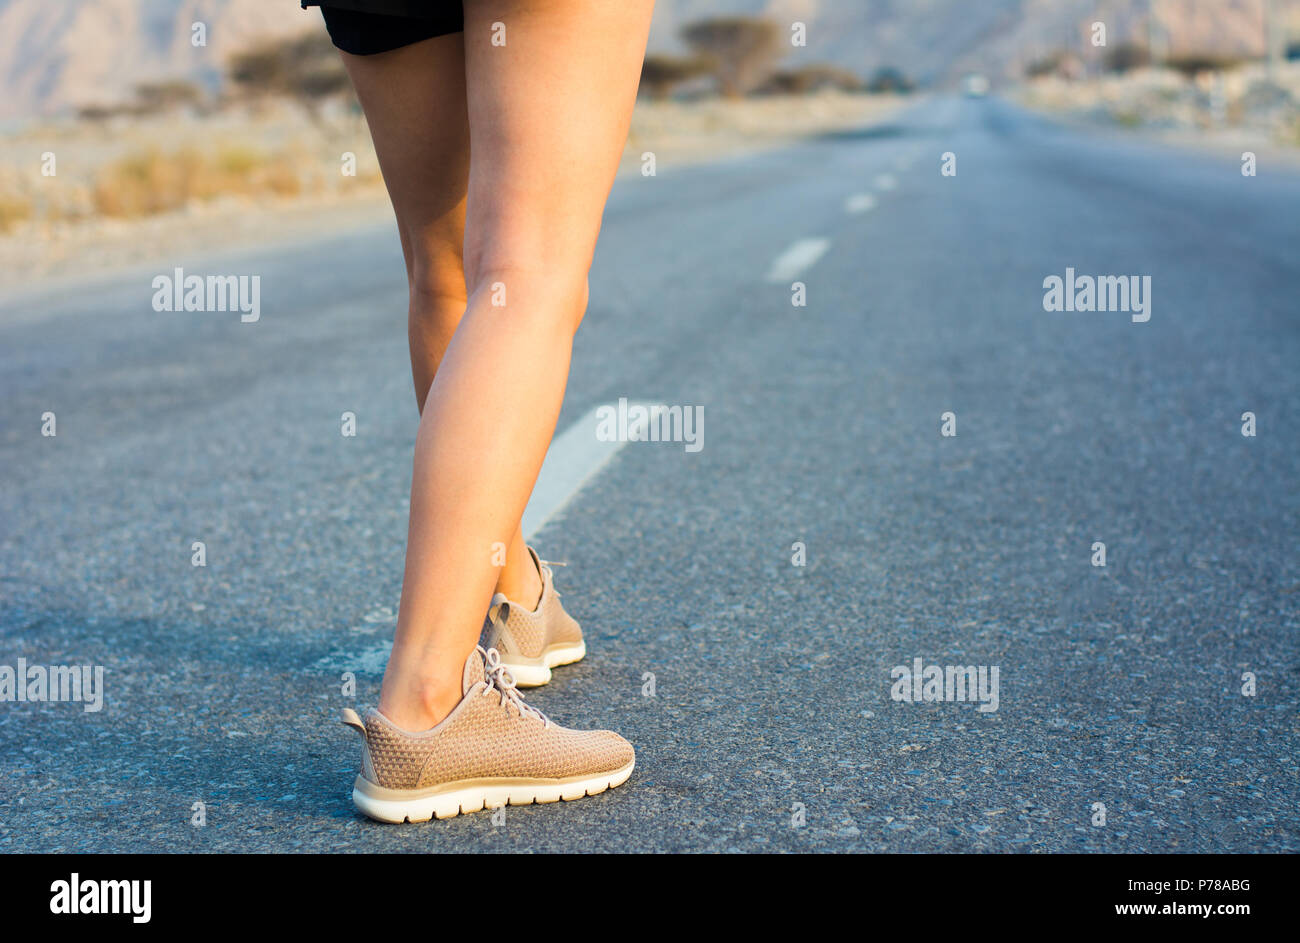 Female runner on the desert road low angle view Stock Photo